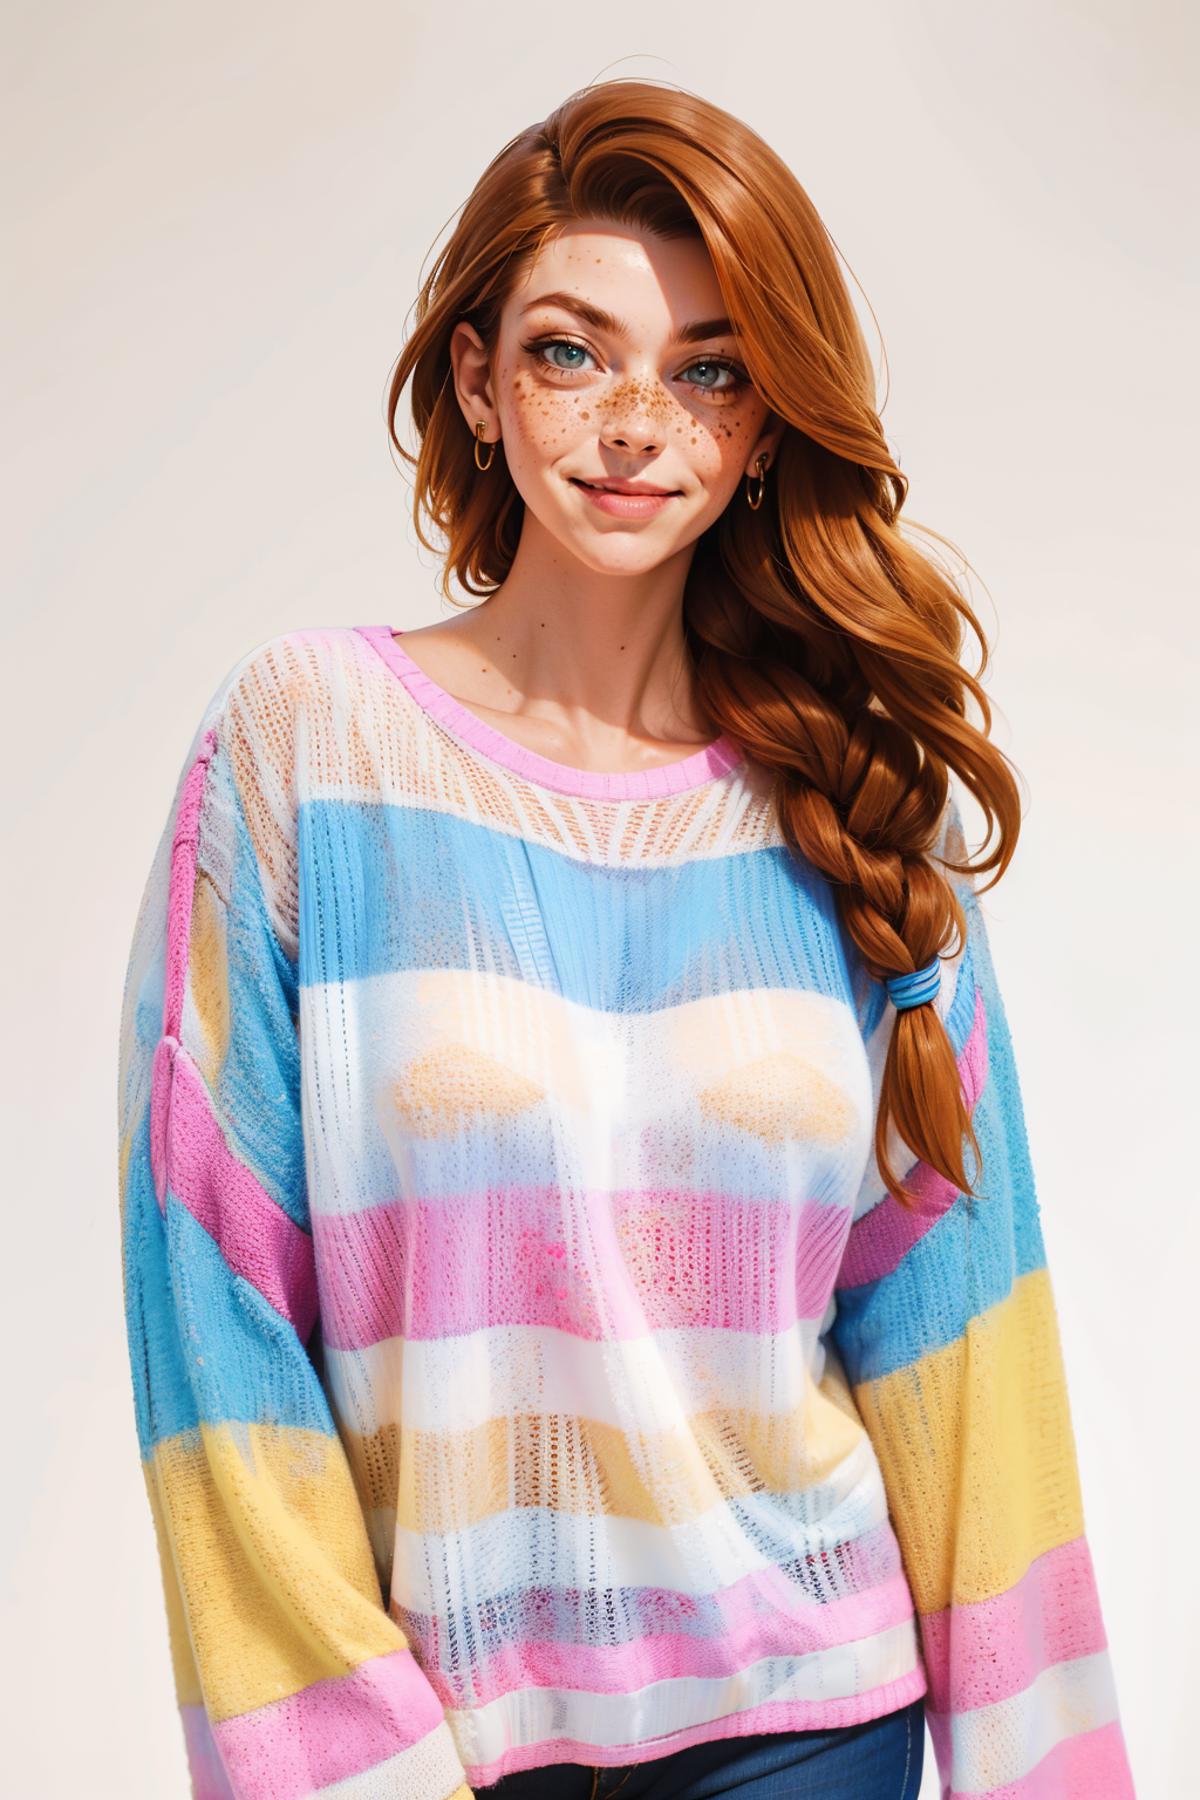 Pastel Knit Sweater image by freckledvixon